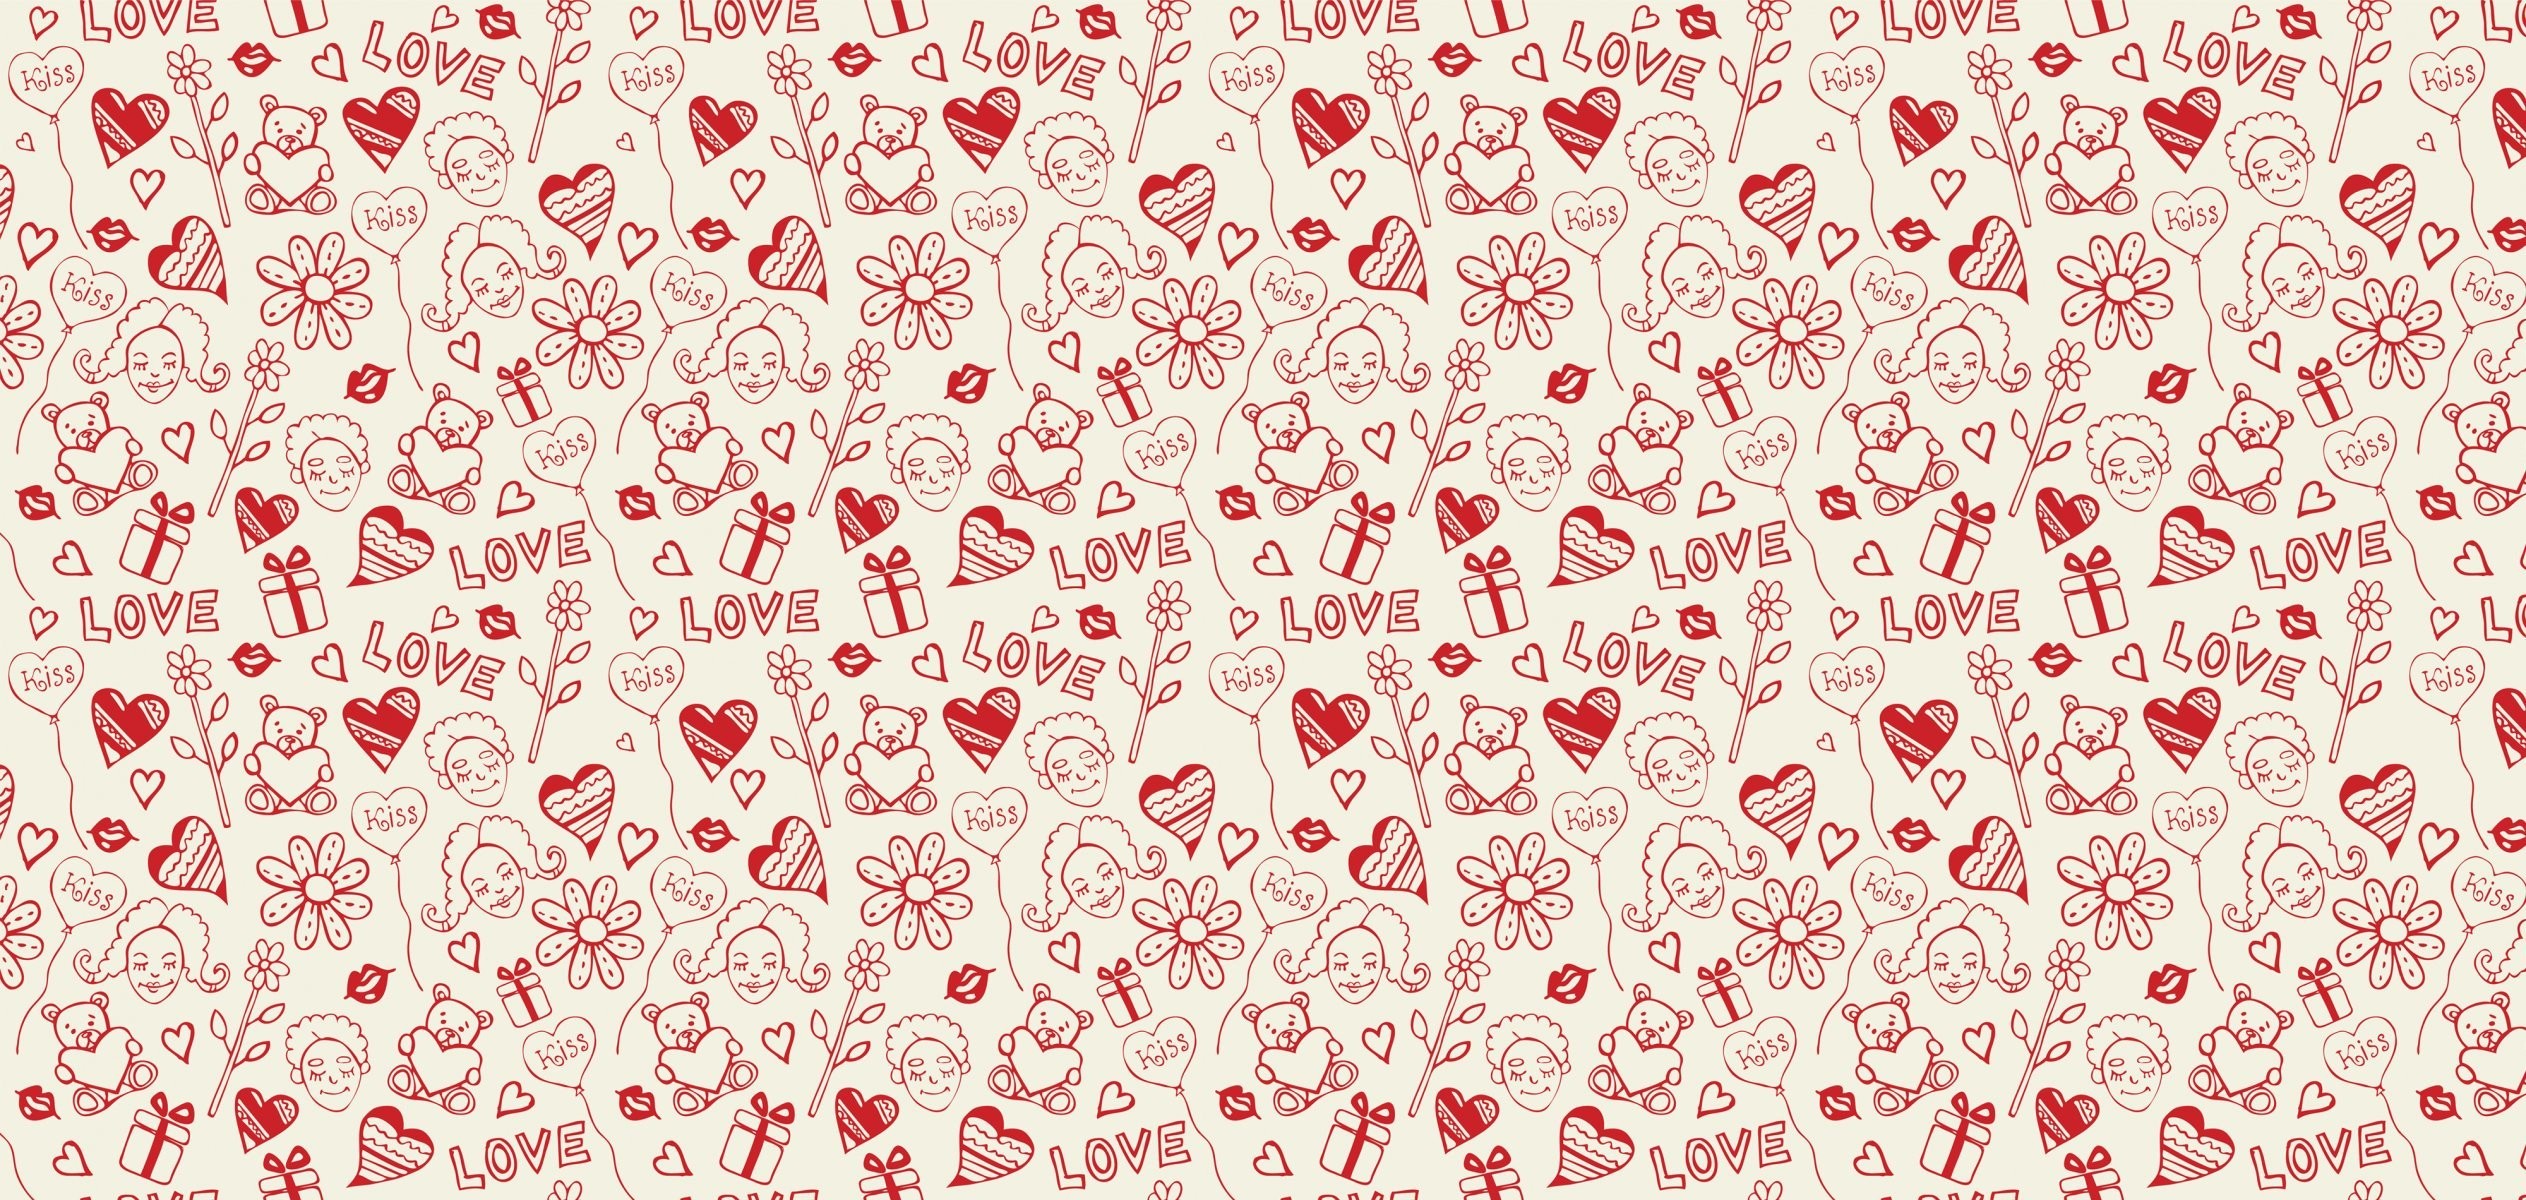 2526x1200 love lips sponge face girl girl gifts heart heart heart valentine holiday  textures vector pictures wallpapers